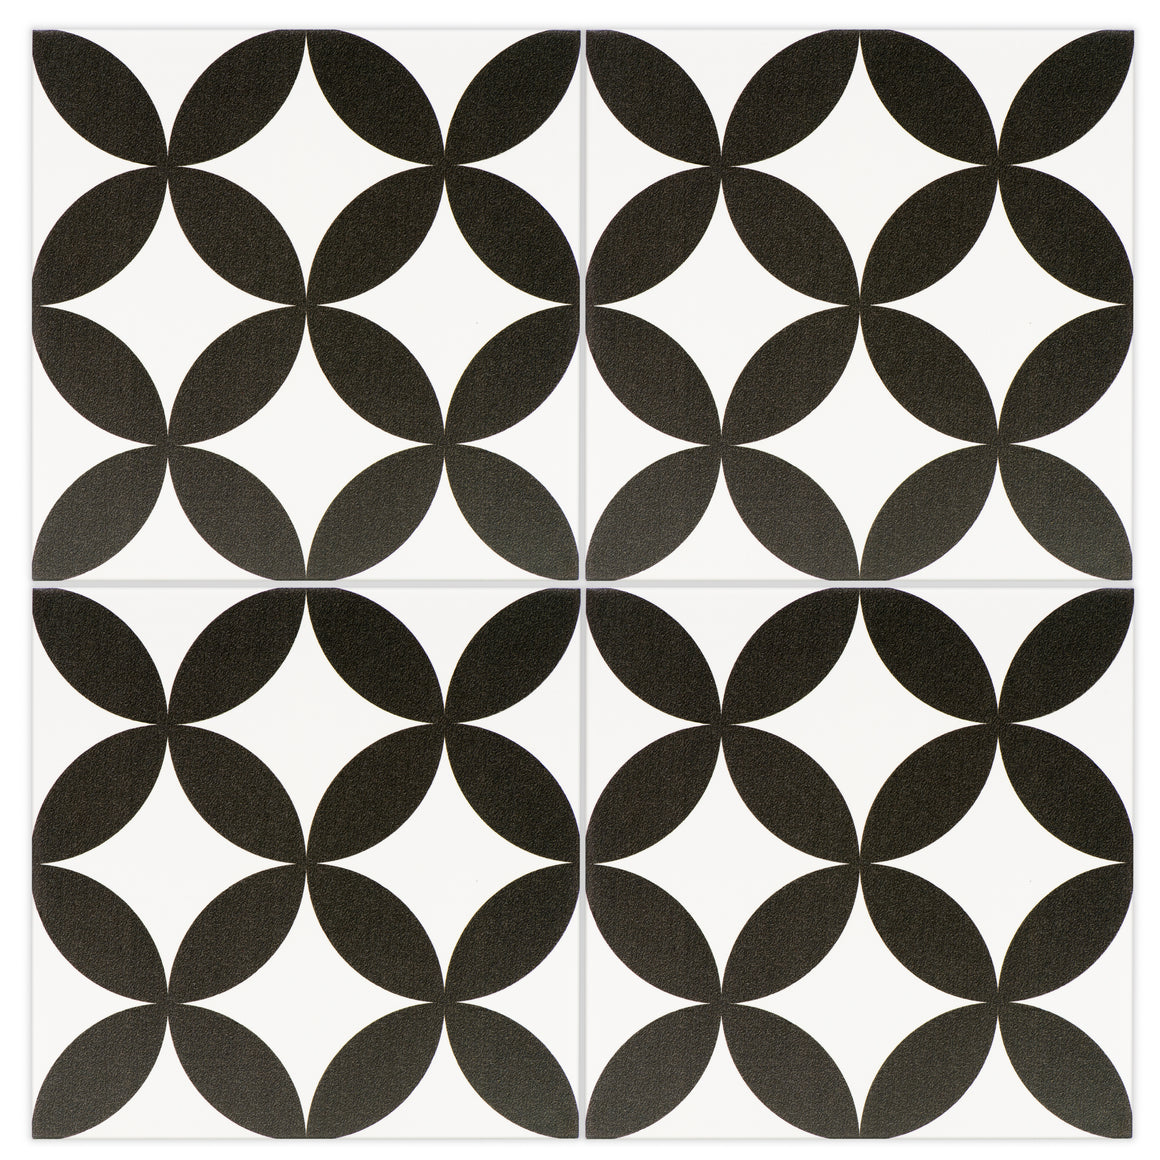 Circulos Noir Black and White modern glossy porcelain decorative pattern tile for residential and commercial bathroom and kitchen floor and wall imported from Portugal, Kerion Décor Fleur Noir available from TilesInspired Canada's Online Tile Store delivering across Ontario and Quebec, including Toronto, Montreal, Ottawa, London, Windsor, Kitchener, Muskoka, Barrie, Kingston, Hamilton, and Niagara renovation idea